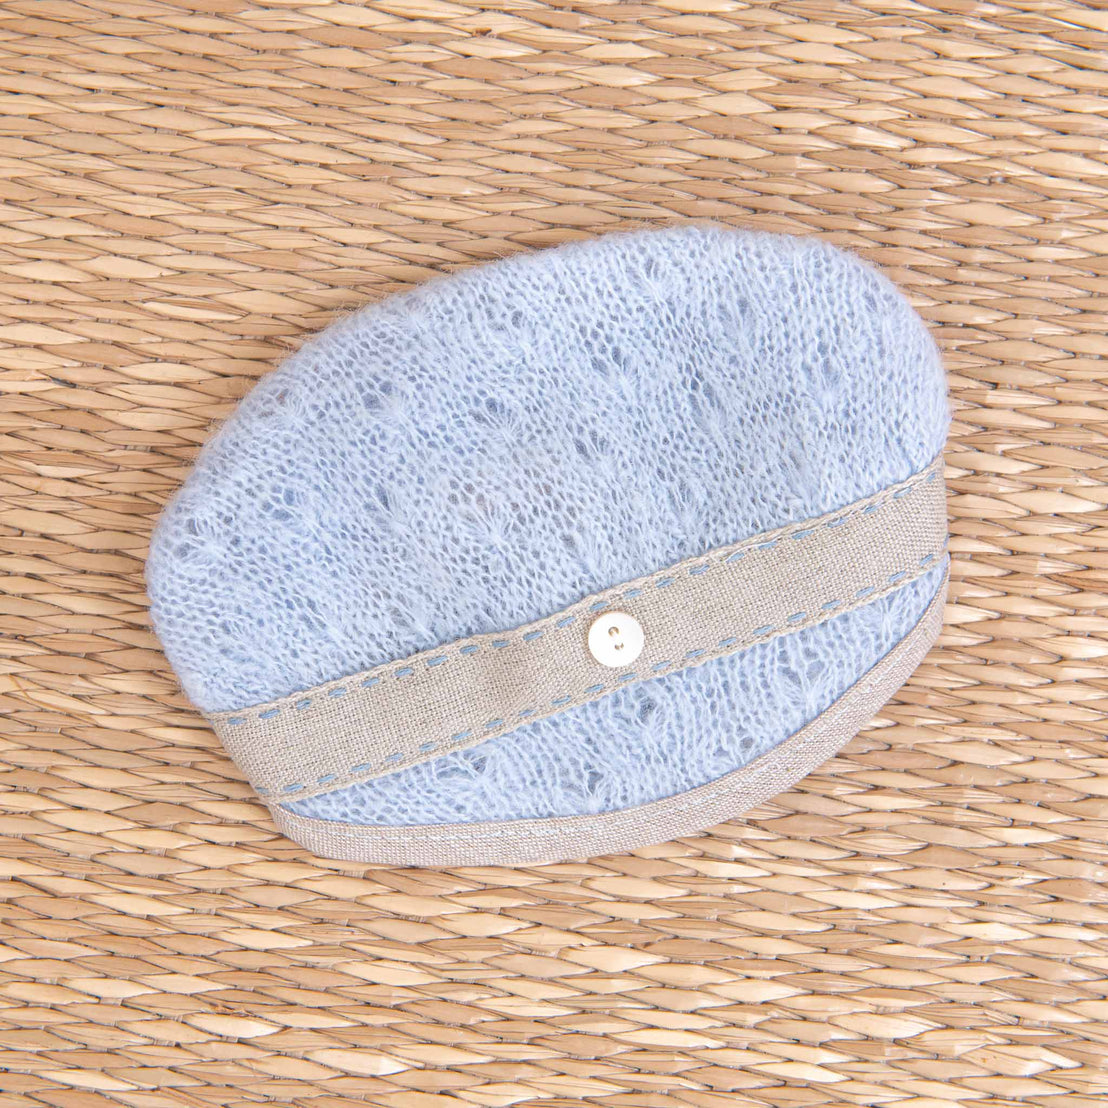 A light blue oval-shaped Austin Hat with a beige strap secured with a small white button, placed on a woven straw-like surface.